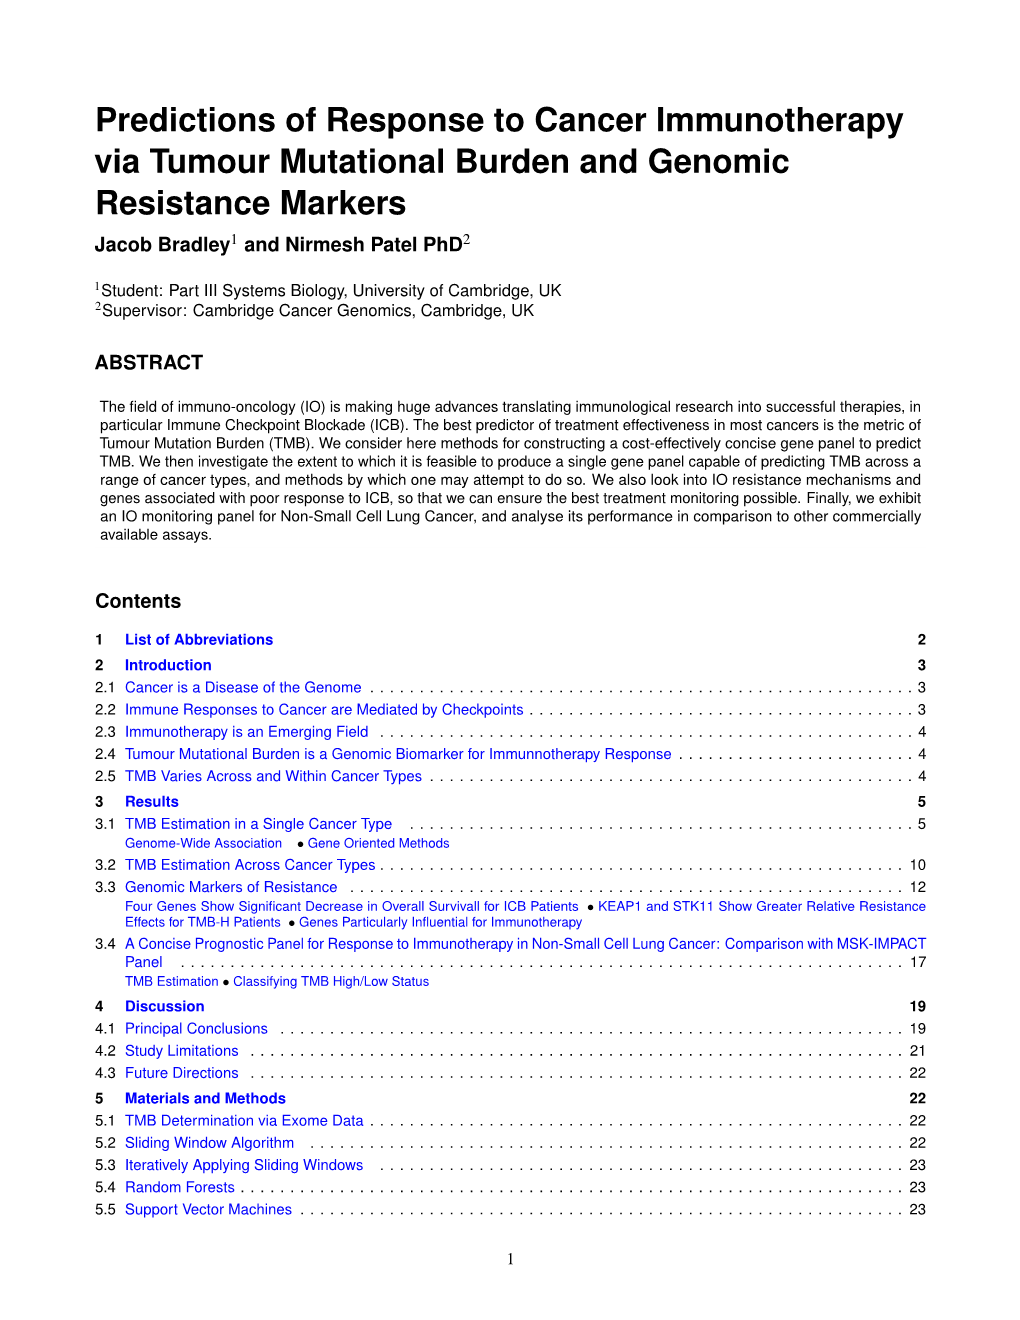 Predictions of Response to Cancer Immunotherapy Via Tumour Mutational Burden and Genomic Resistance Markers Jacob Bradley1 and Nirmesh Patel Phd2